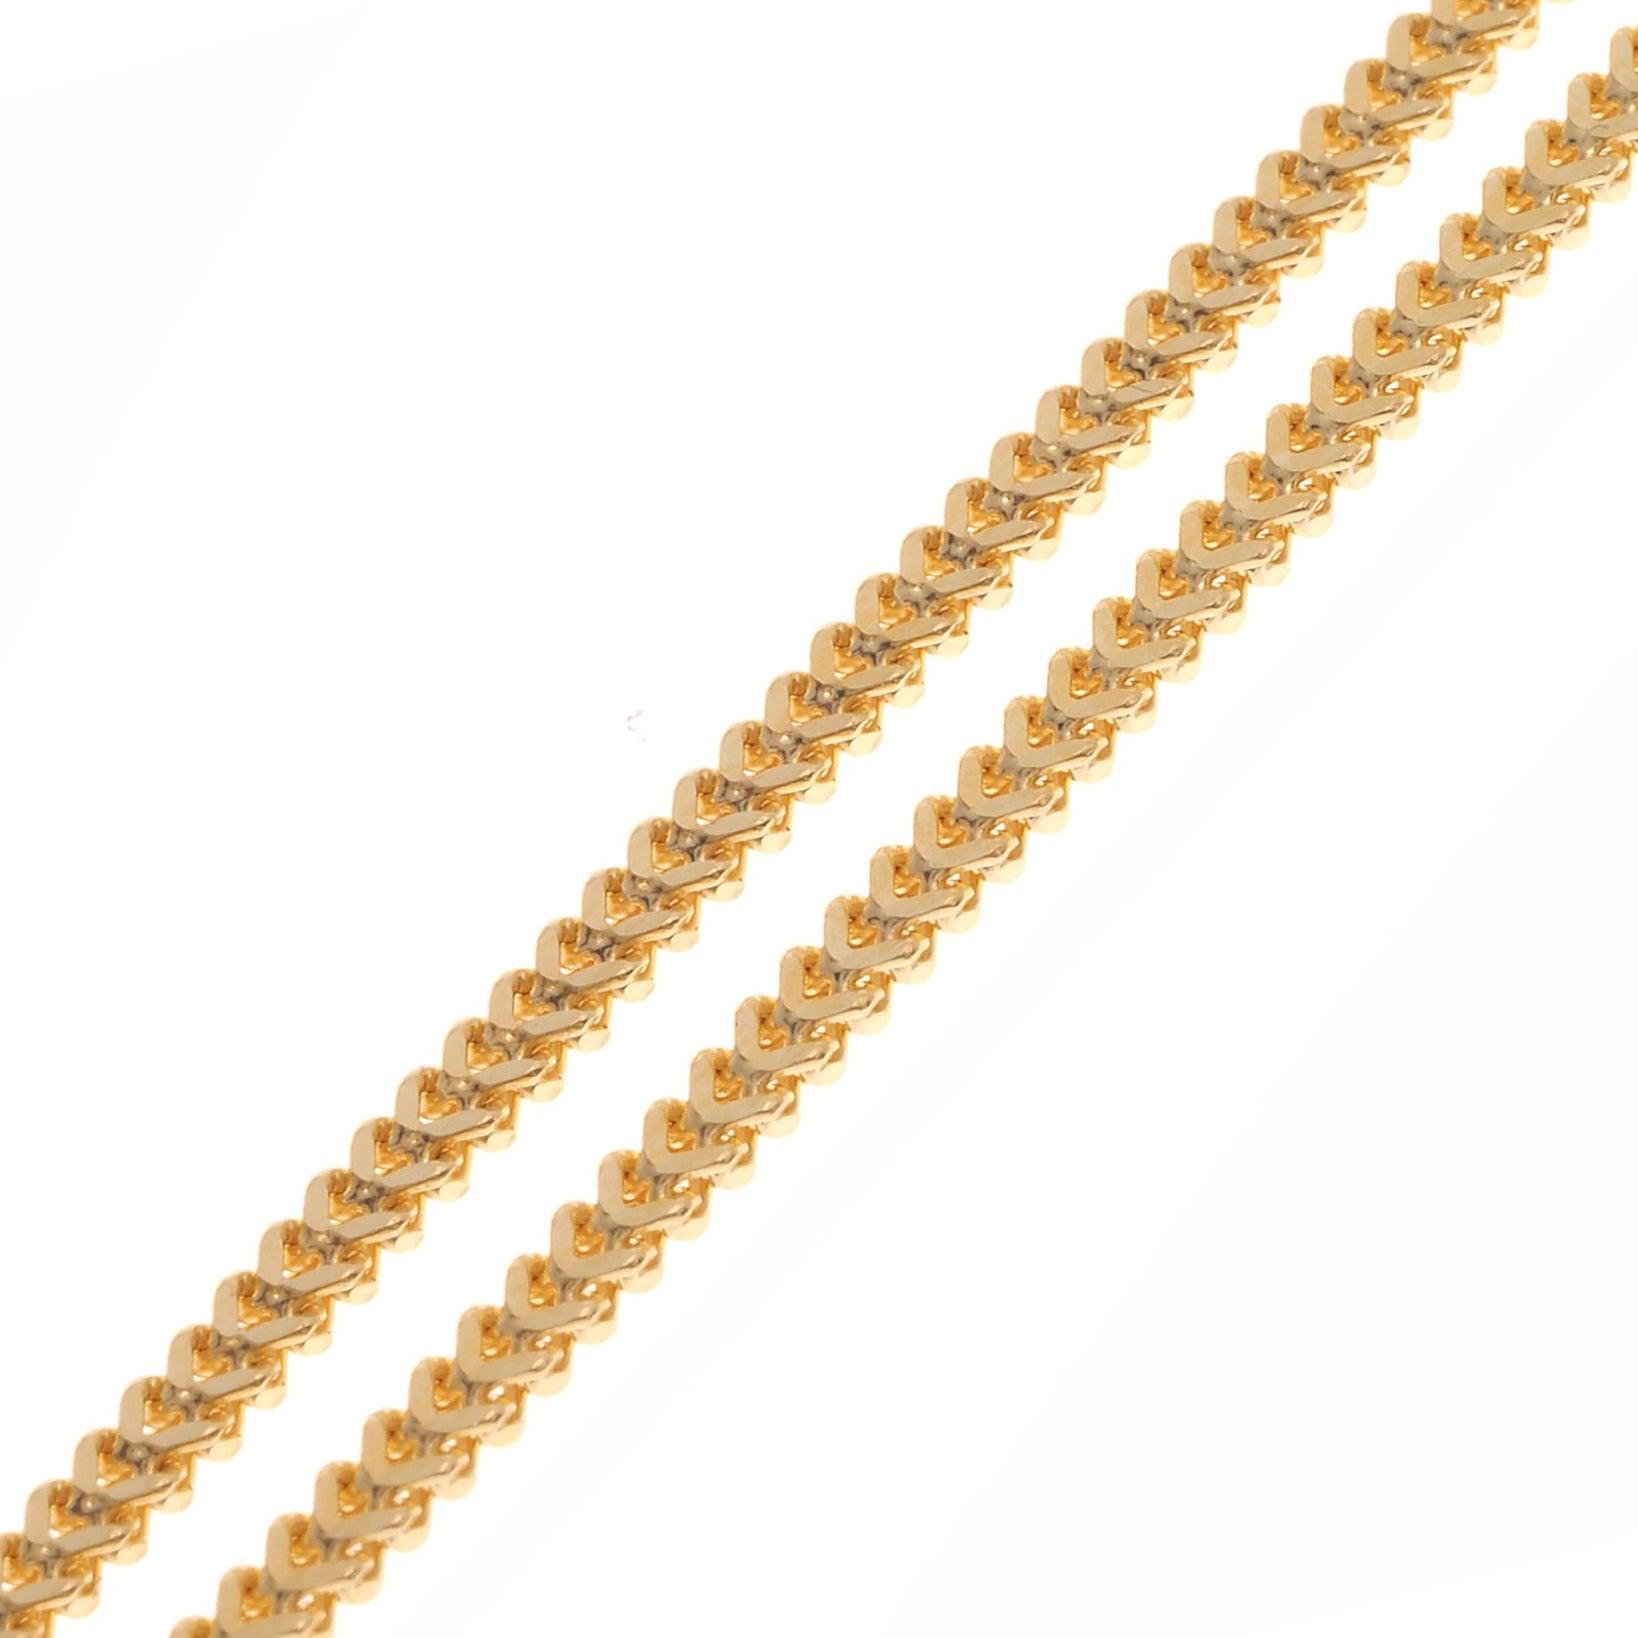 22ct Gold Foxtail Chain with a lobster clasp C-3799 - Minar Jewellers